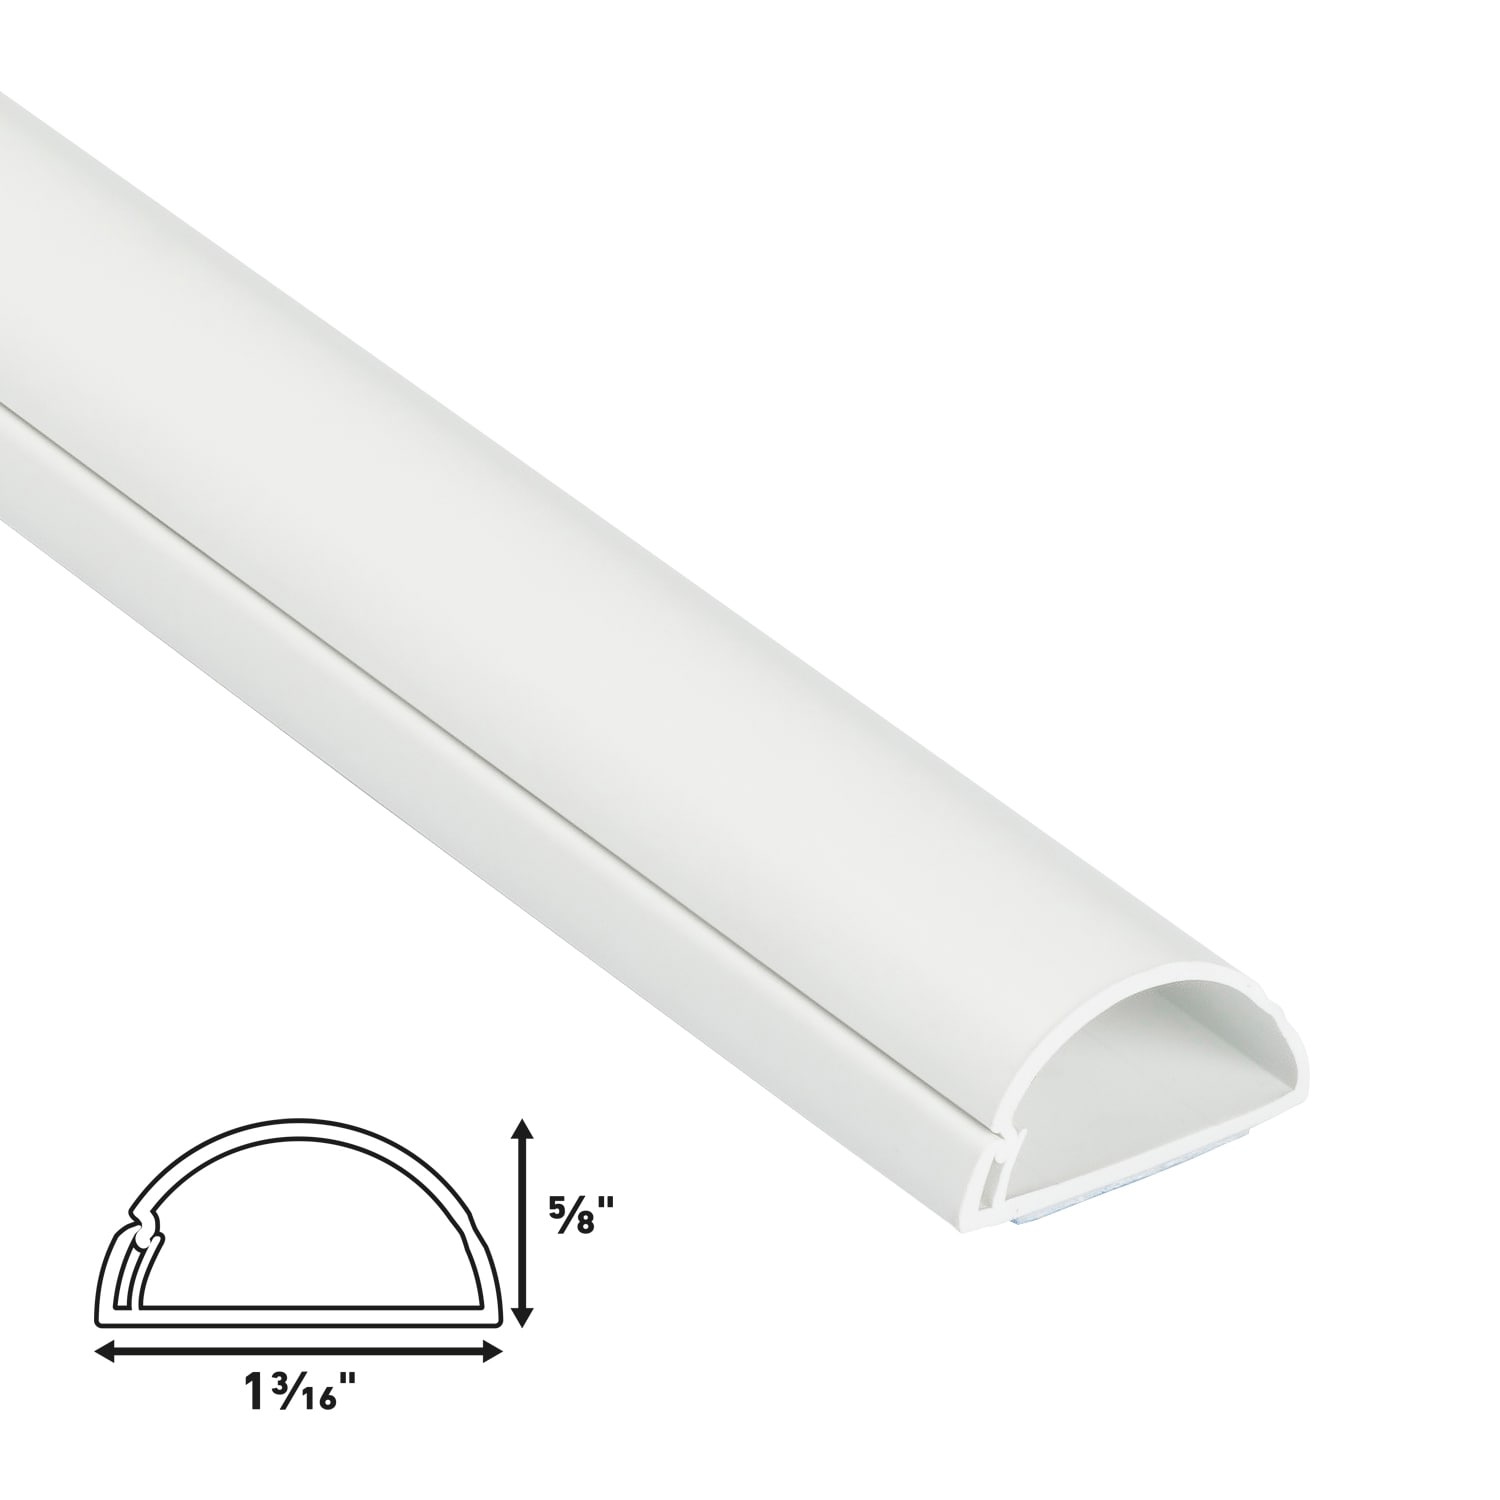 D-Line White Half Round Cord Cover, 2x1in, 39in Length